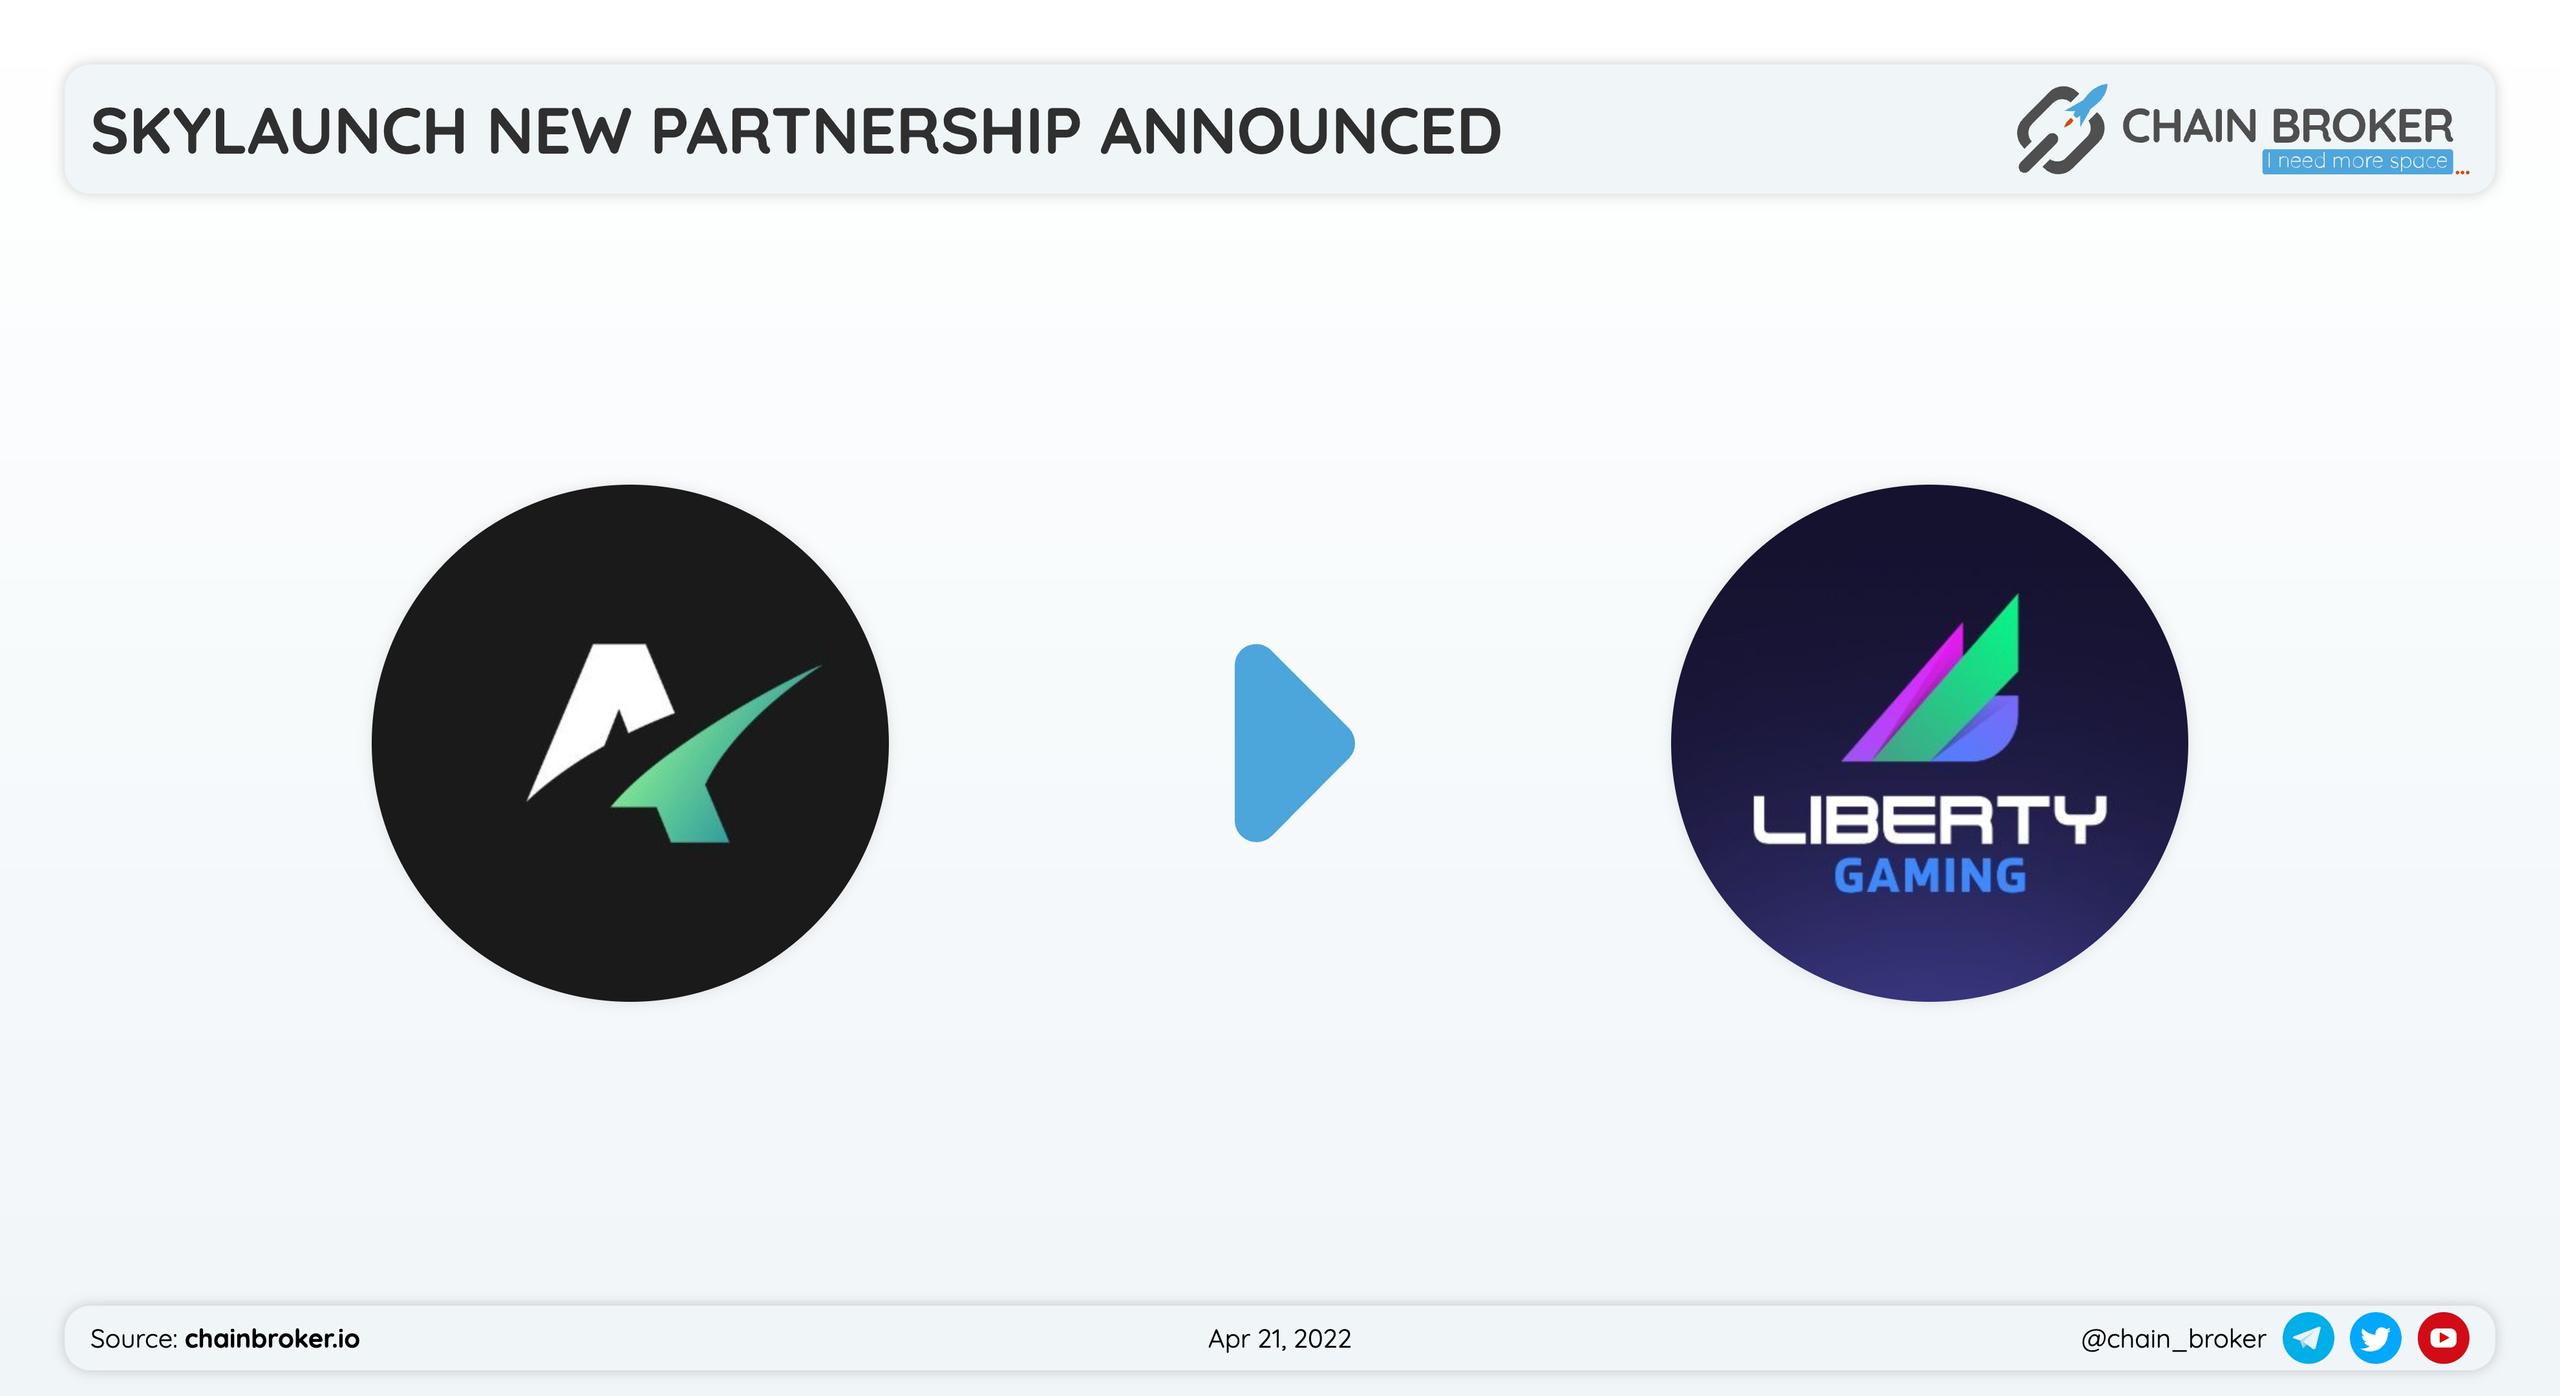 SkyLaunch has partnered with Liberty Gaming for ecosystem expansion.